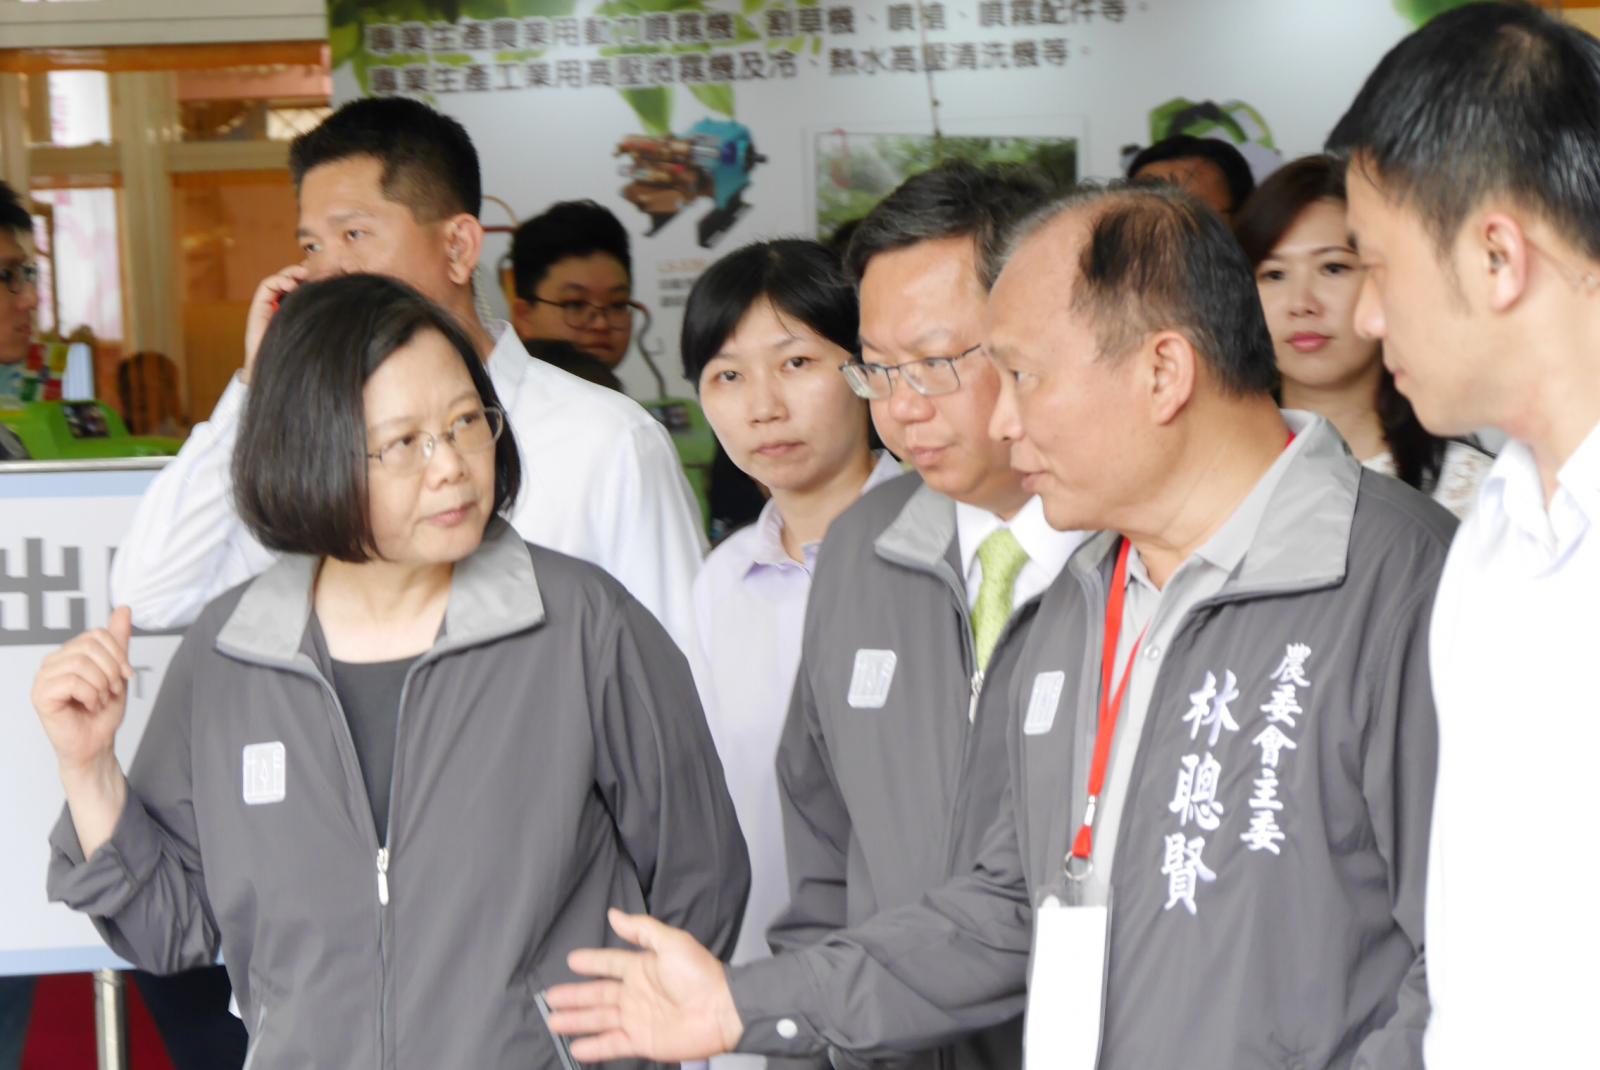 The COA highlighted the key policy of assisting New Southbound Countries to improve agricultural management and farmers' income while securing export opportunity for Taiwan's agricultural materials, machinery, equipment, and technical know-how.